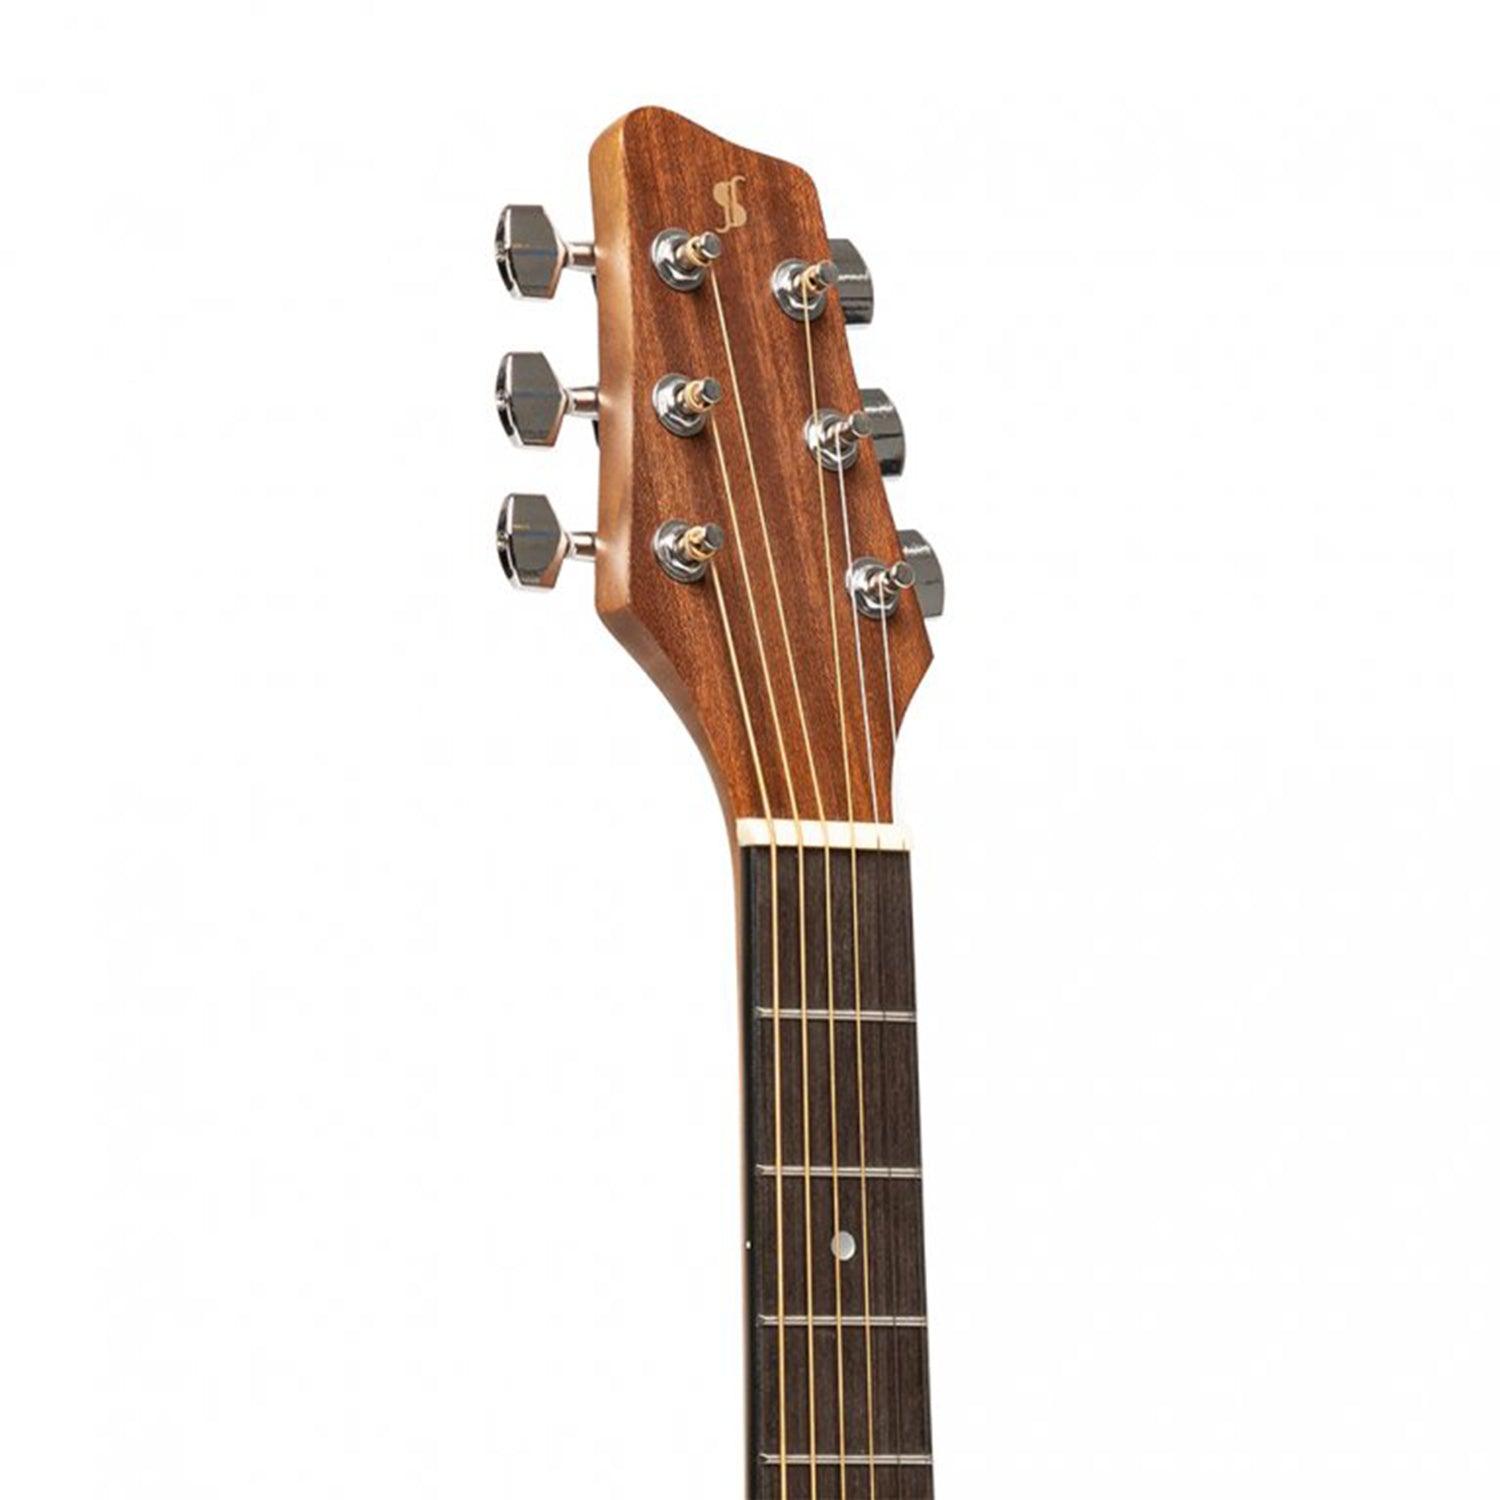 Stagg SA25 A MAHO Acoustic Auditorium Guitar, Sapele, Natural Finish - DY Pro Audio